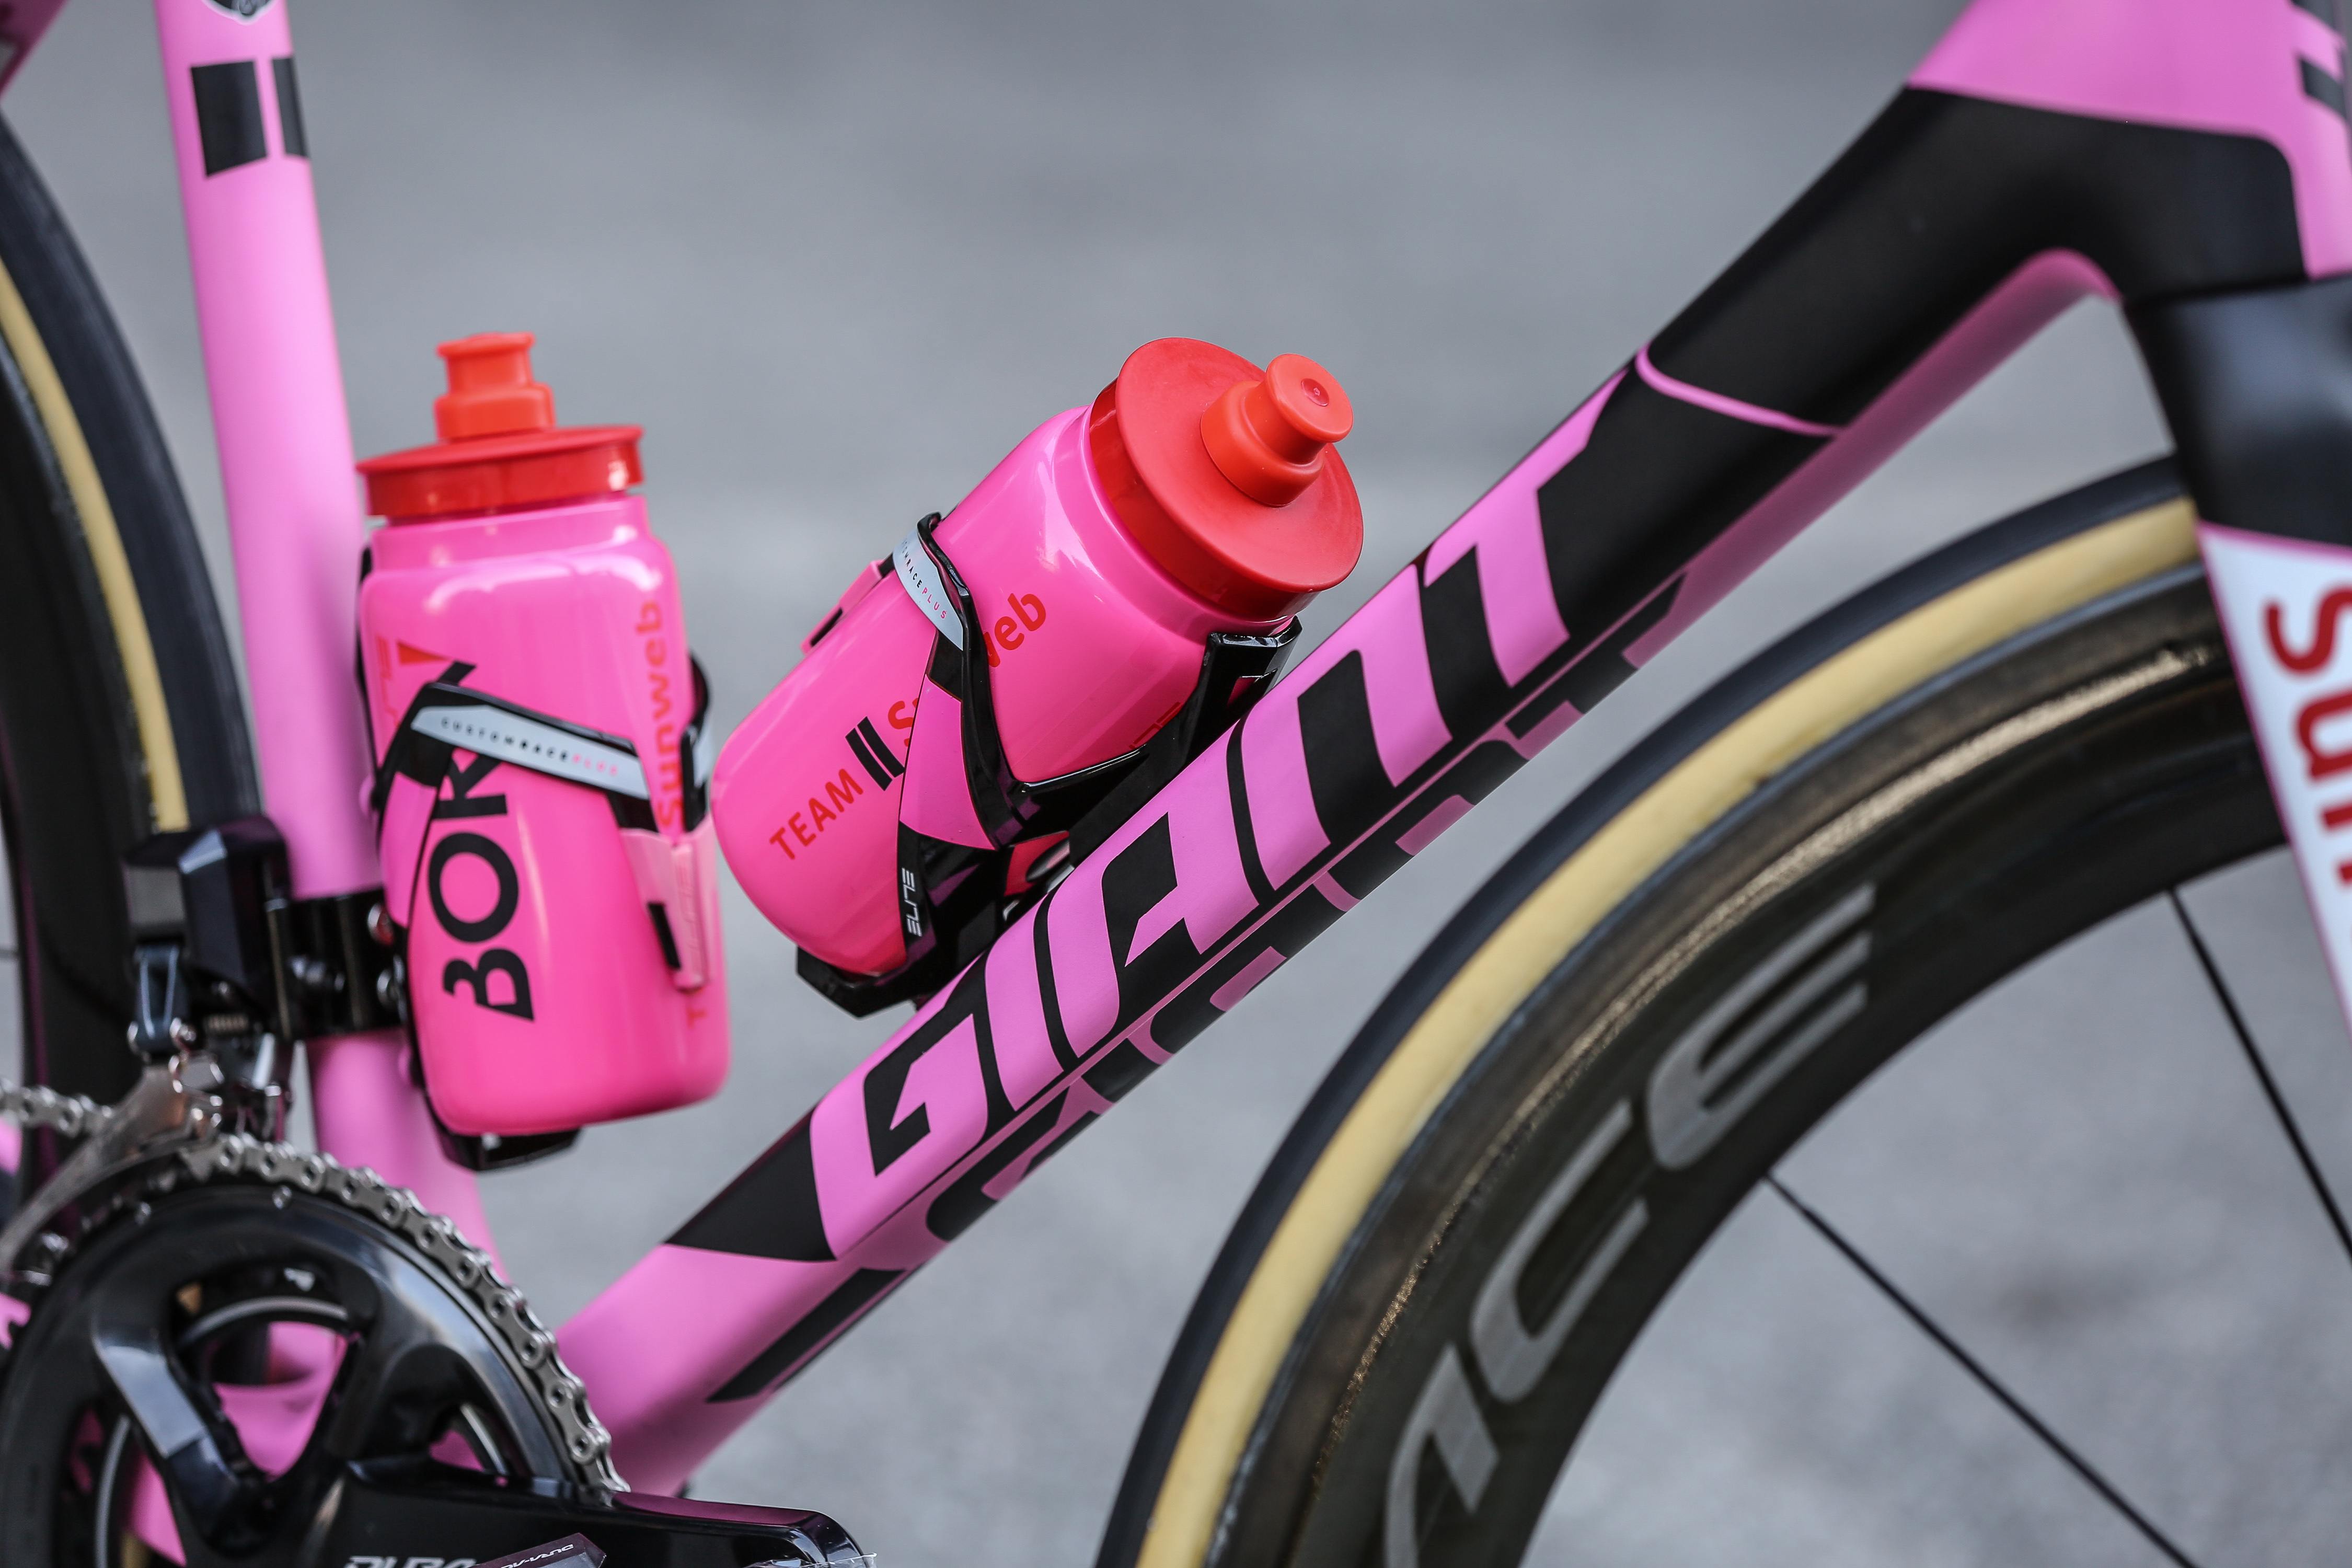 giant tcr pink